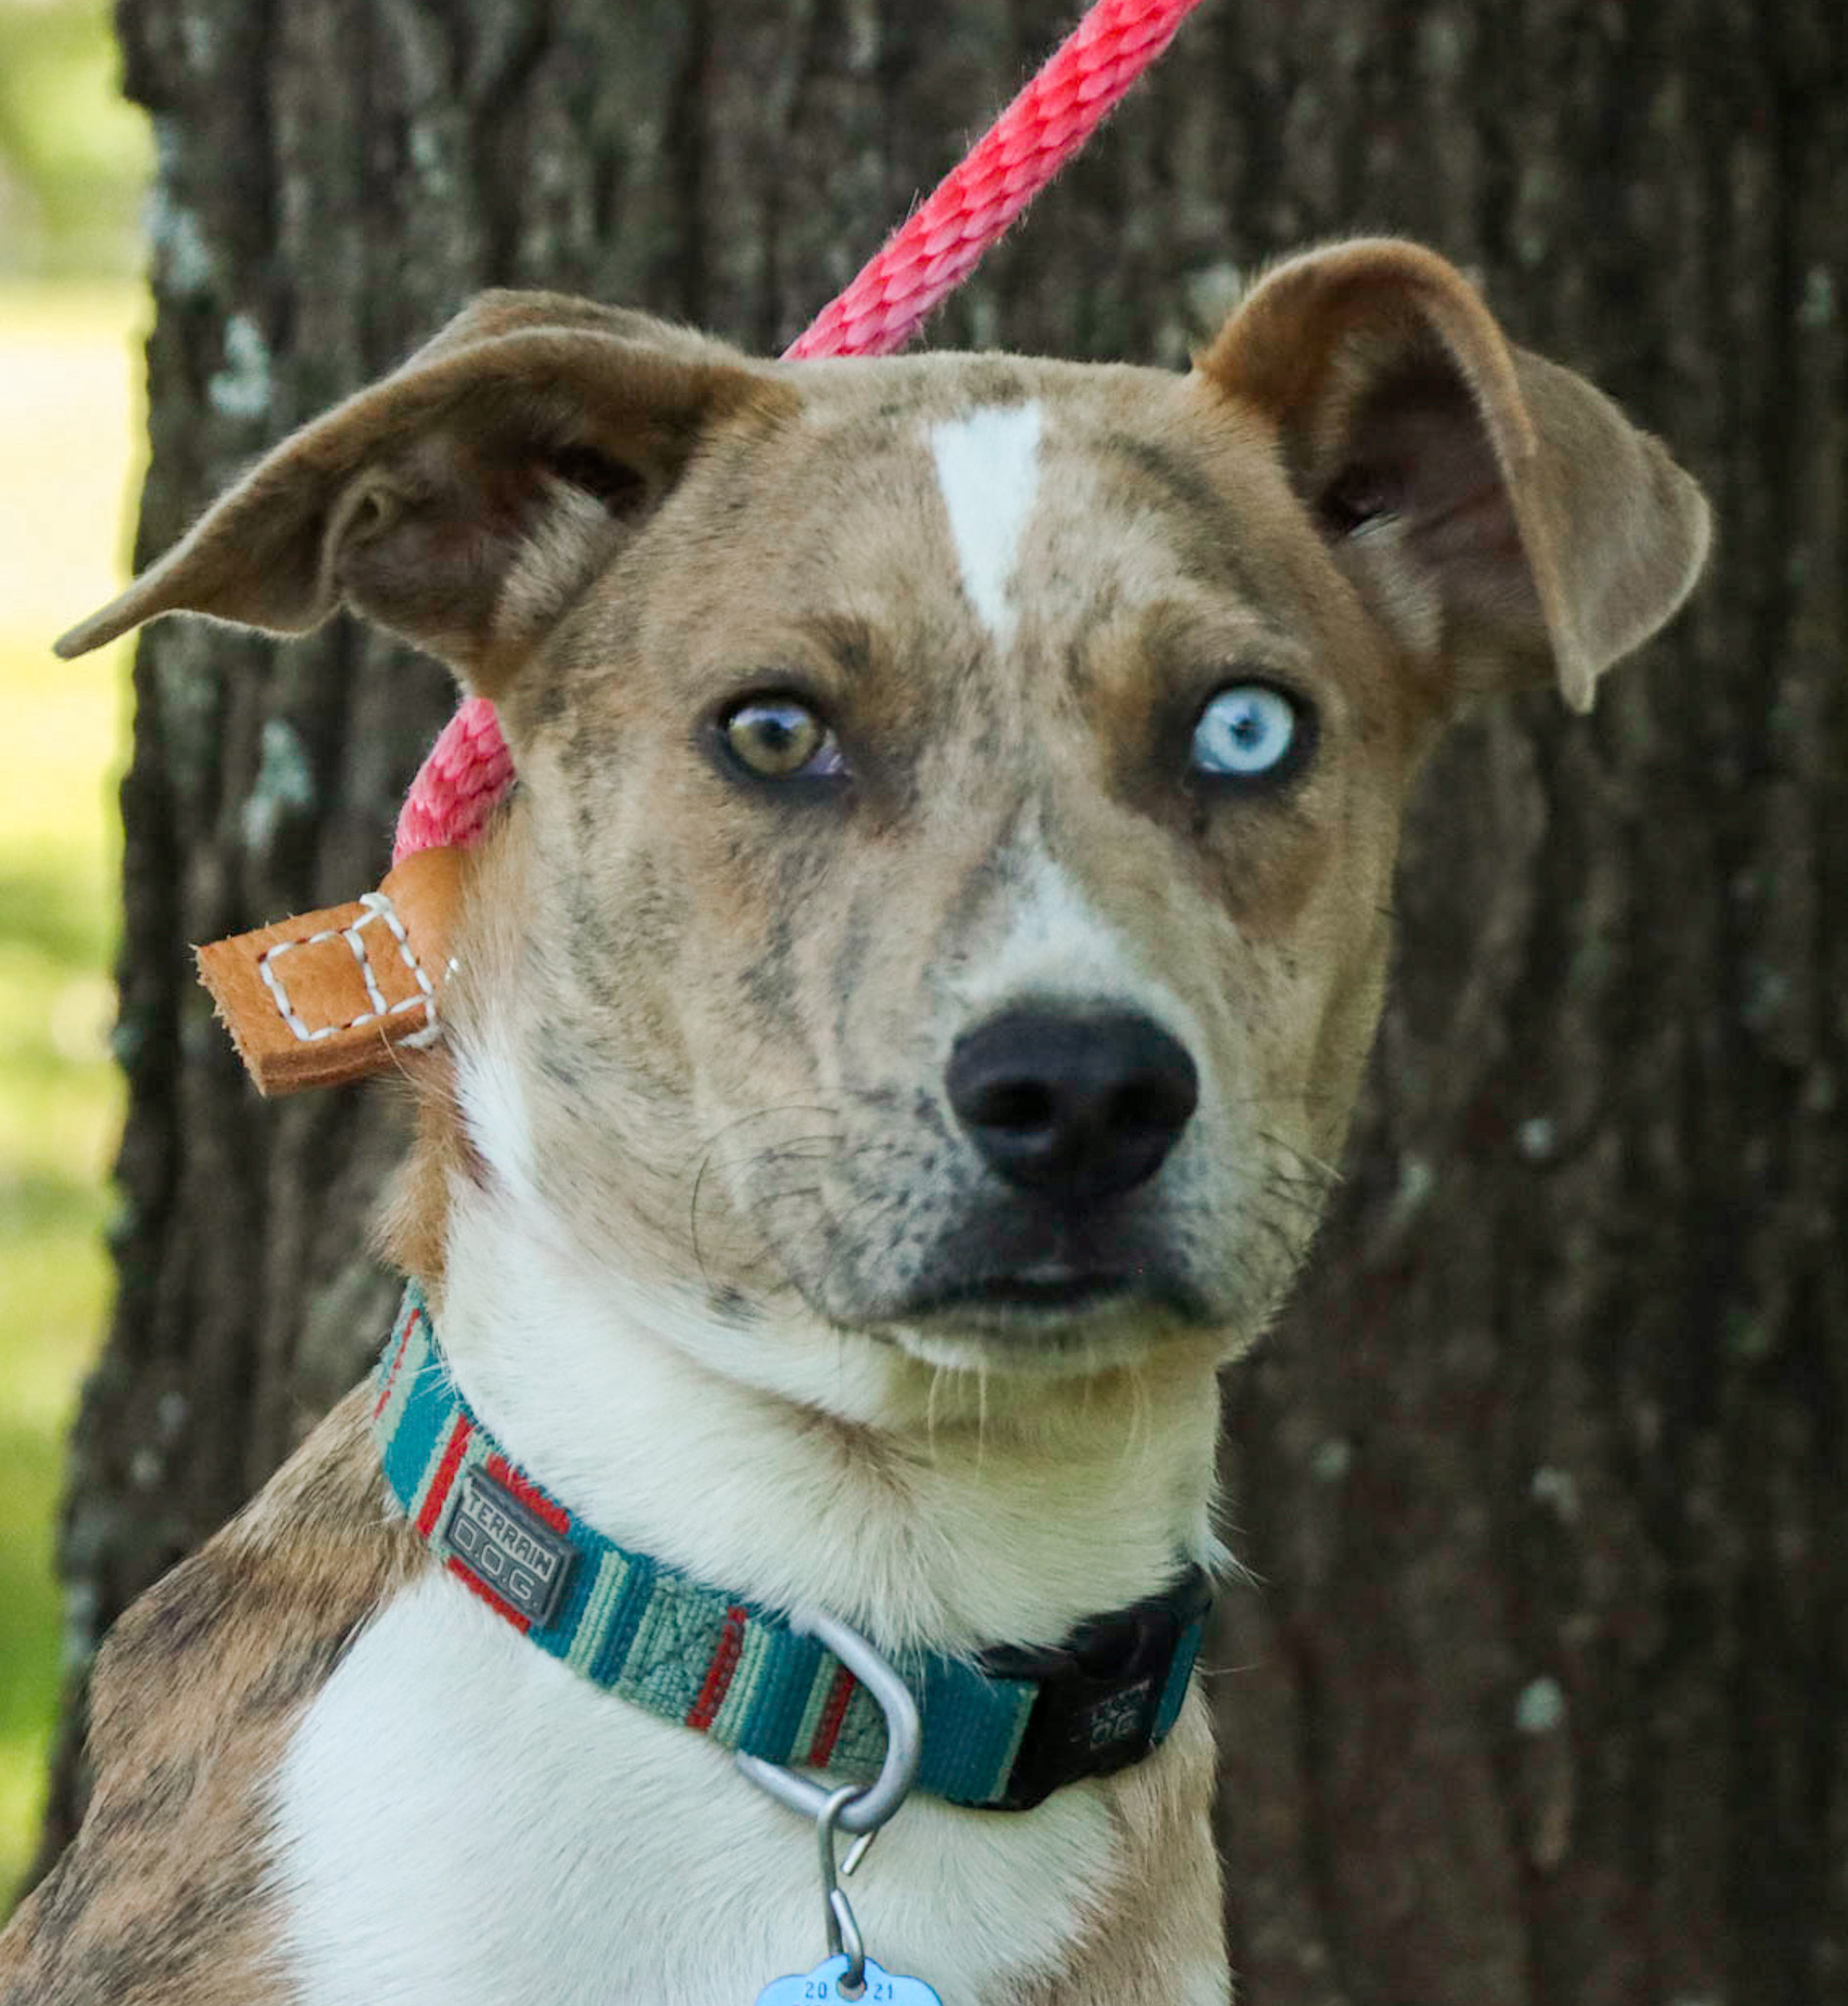 [12+] 6 Months Old Expensive Catahoula Dog Puppy For Sale Or Adoption
Near Me